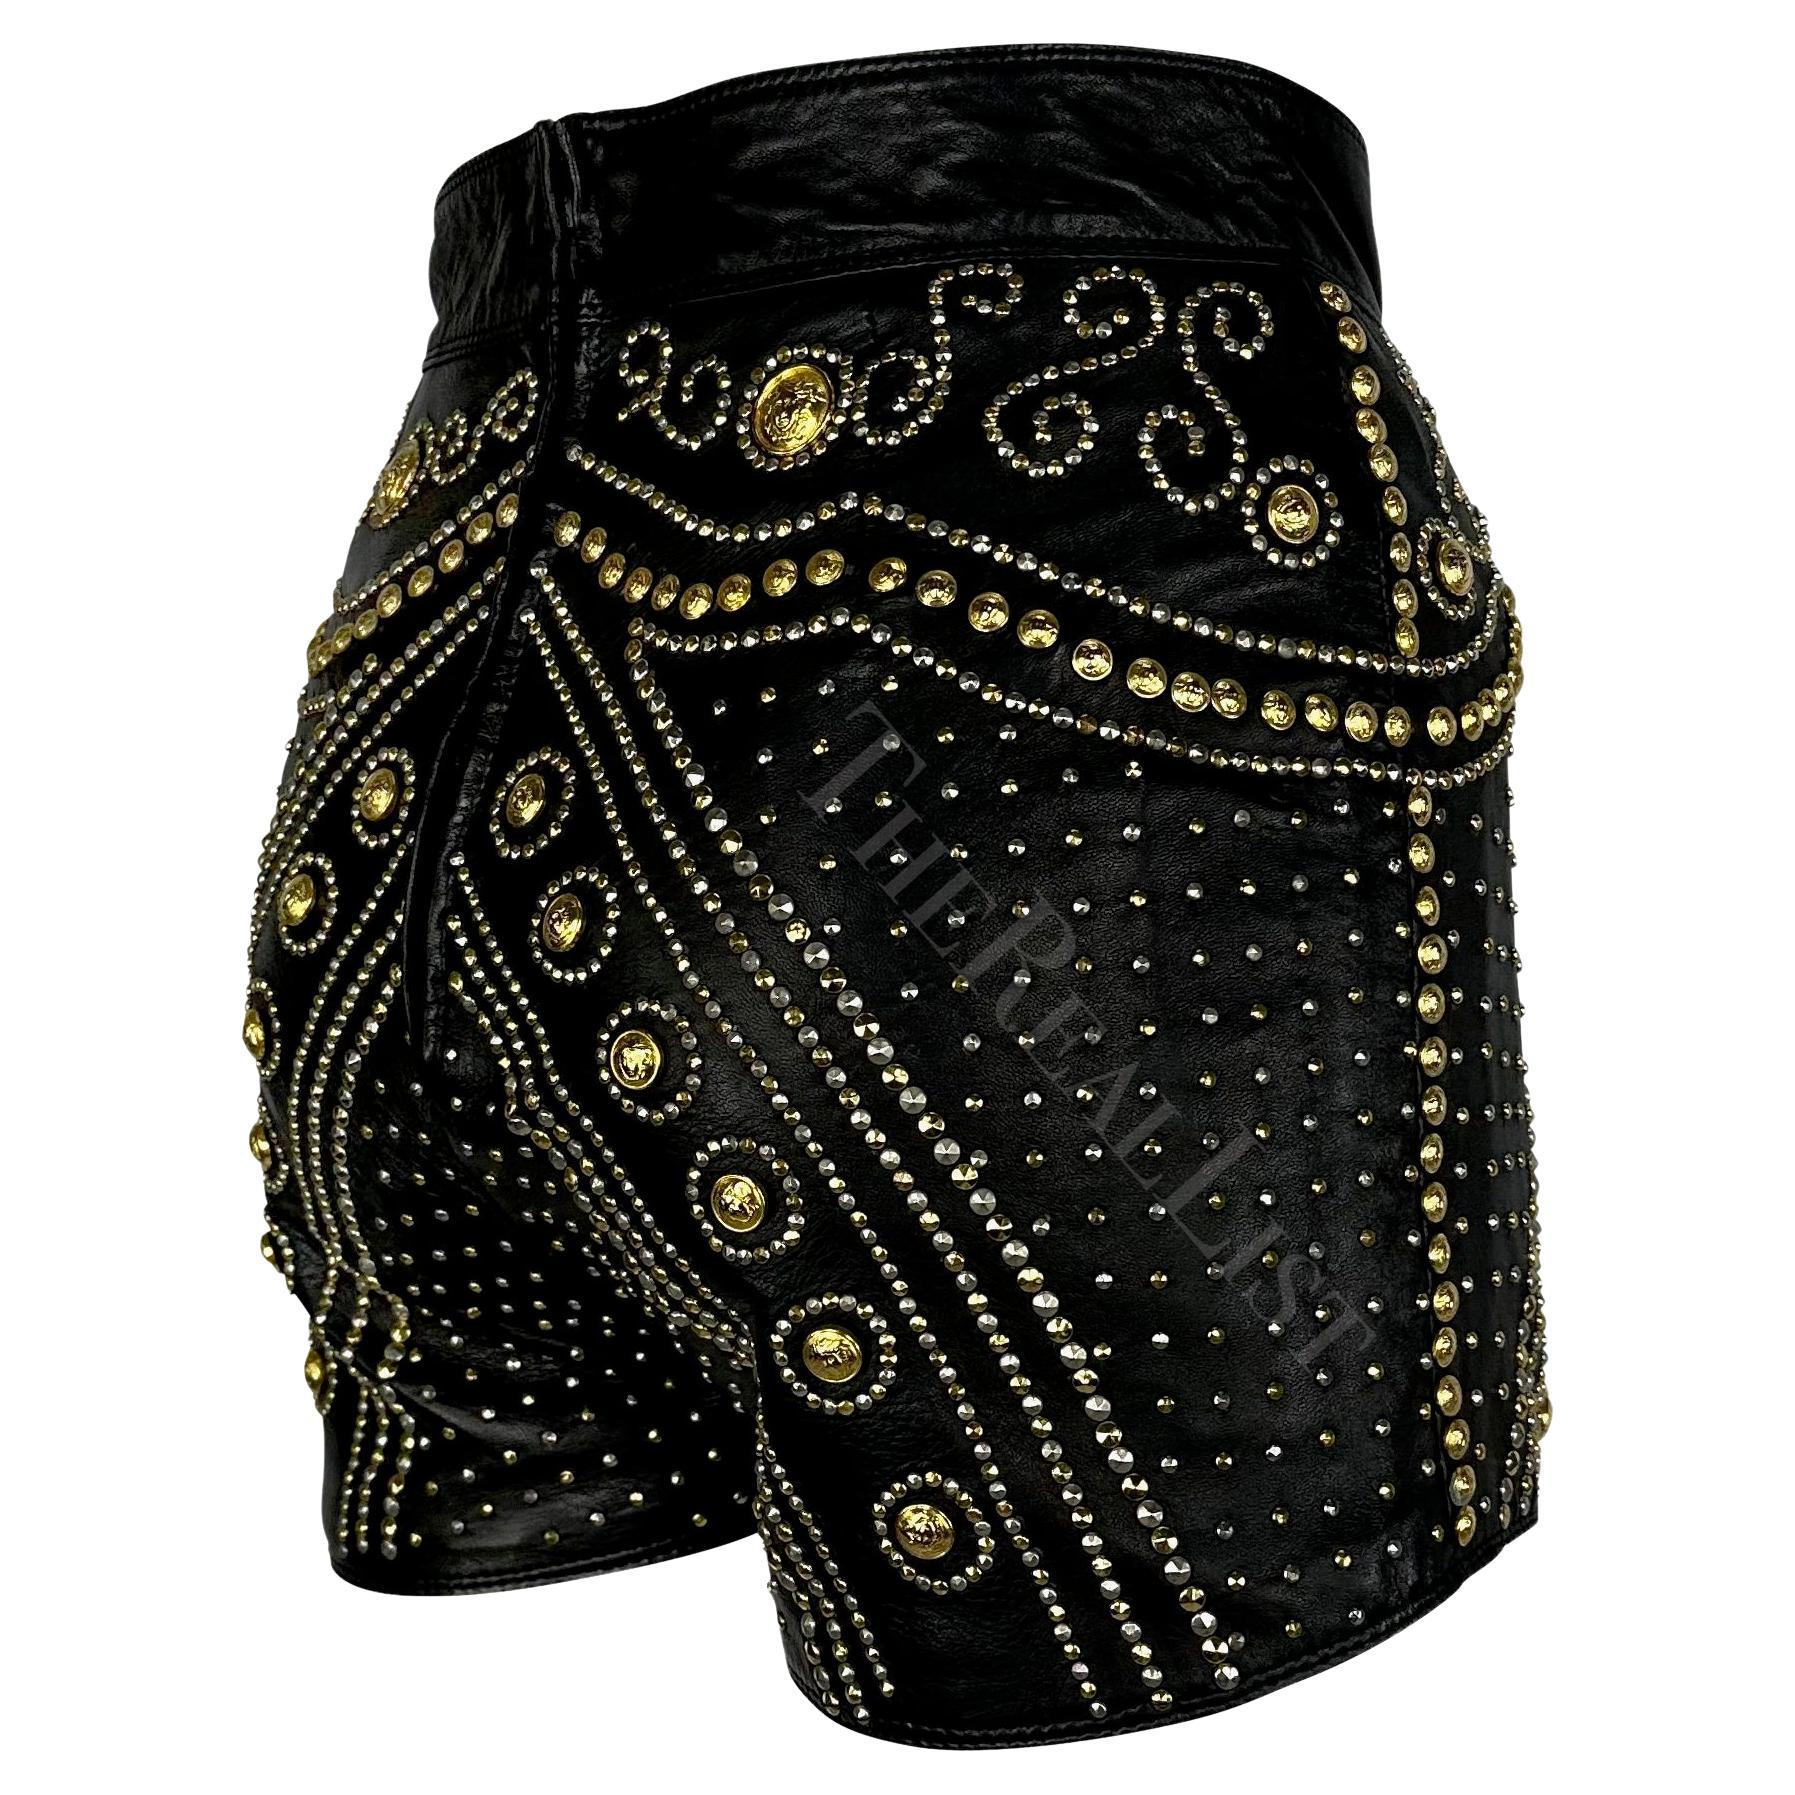 F/W 1992 Atelier Versace Haute Couture Runway Medusa Studded Leather Shorts For Sale 4